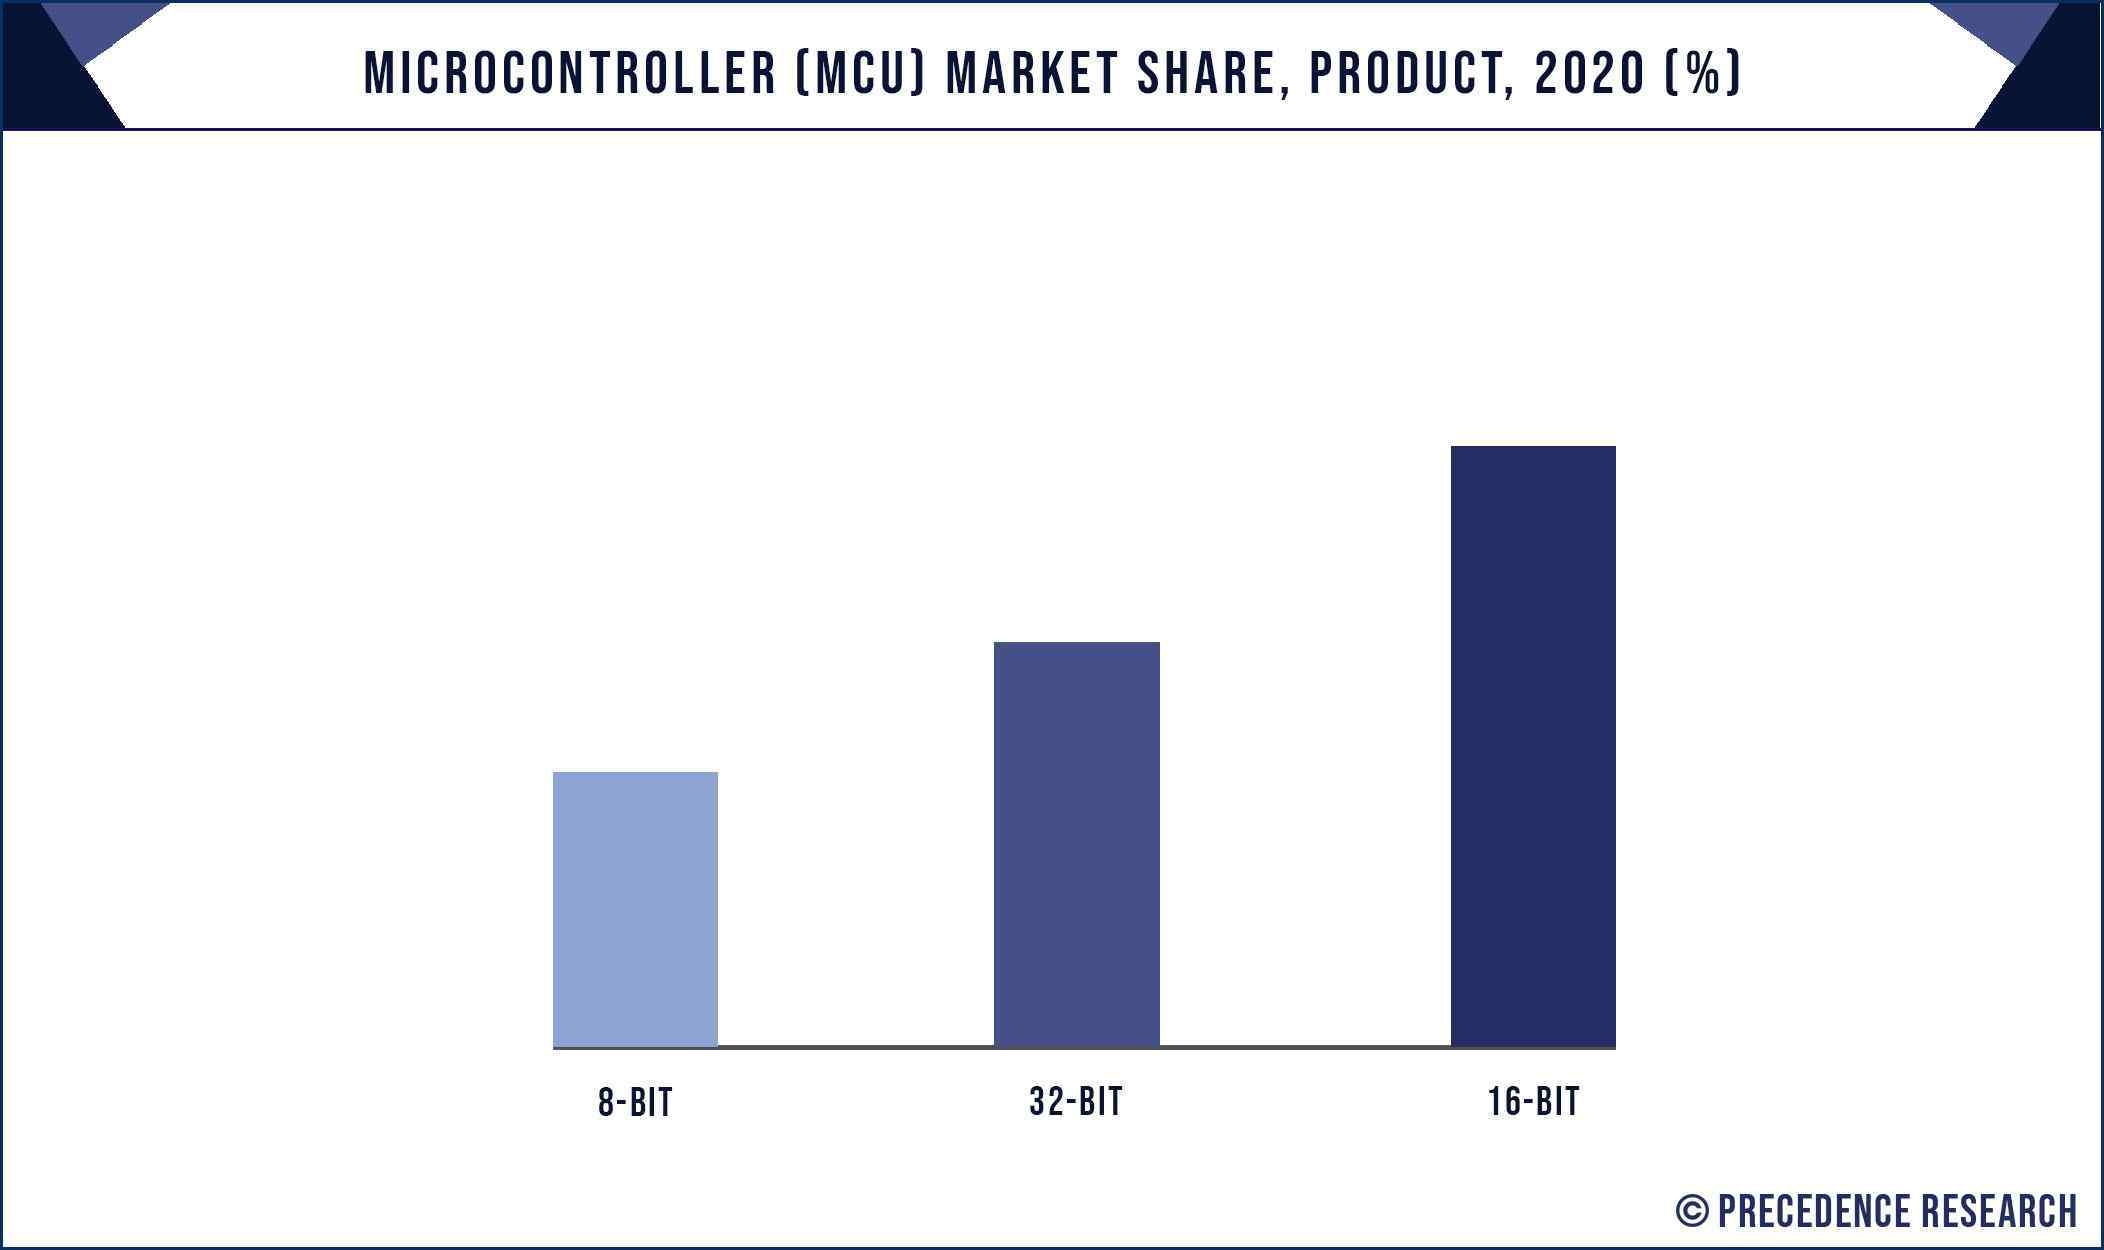 Microcontroller (MCU) Market Share, By Product, 2020 (%)